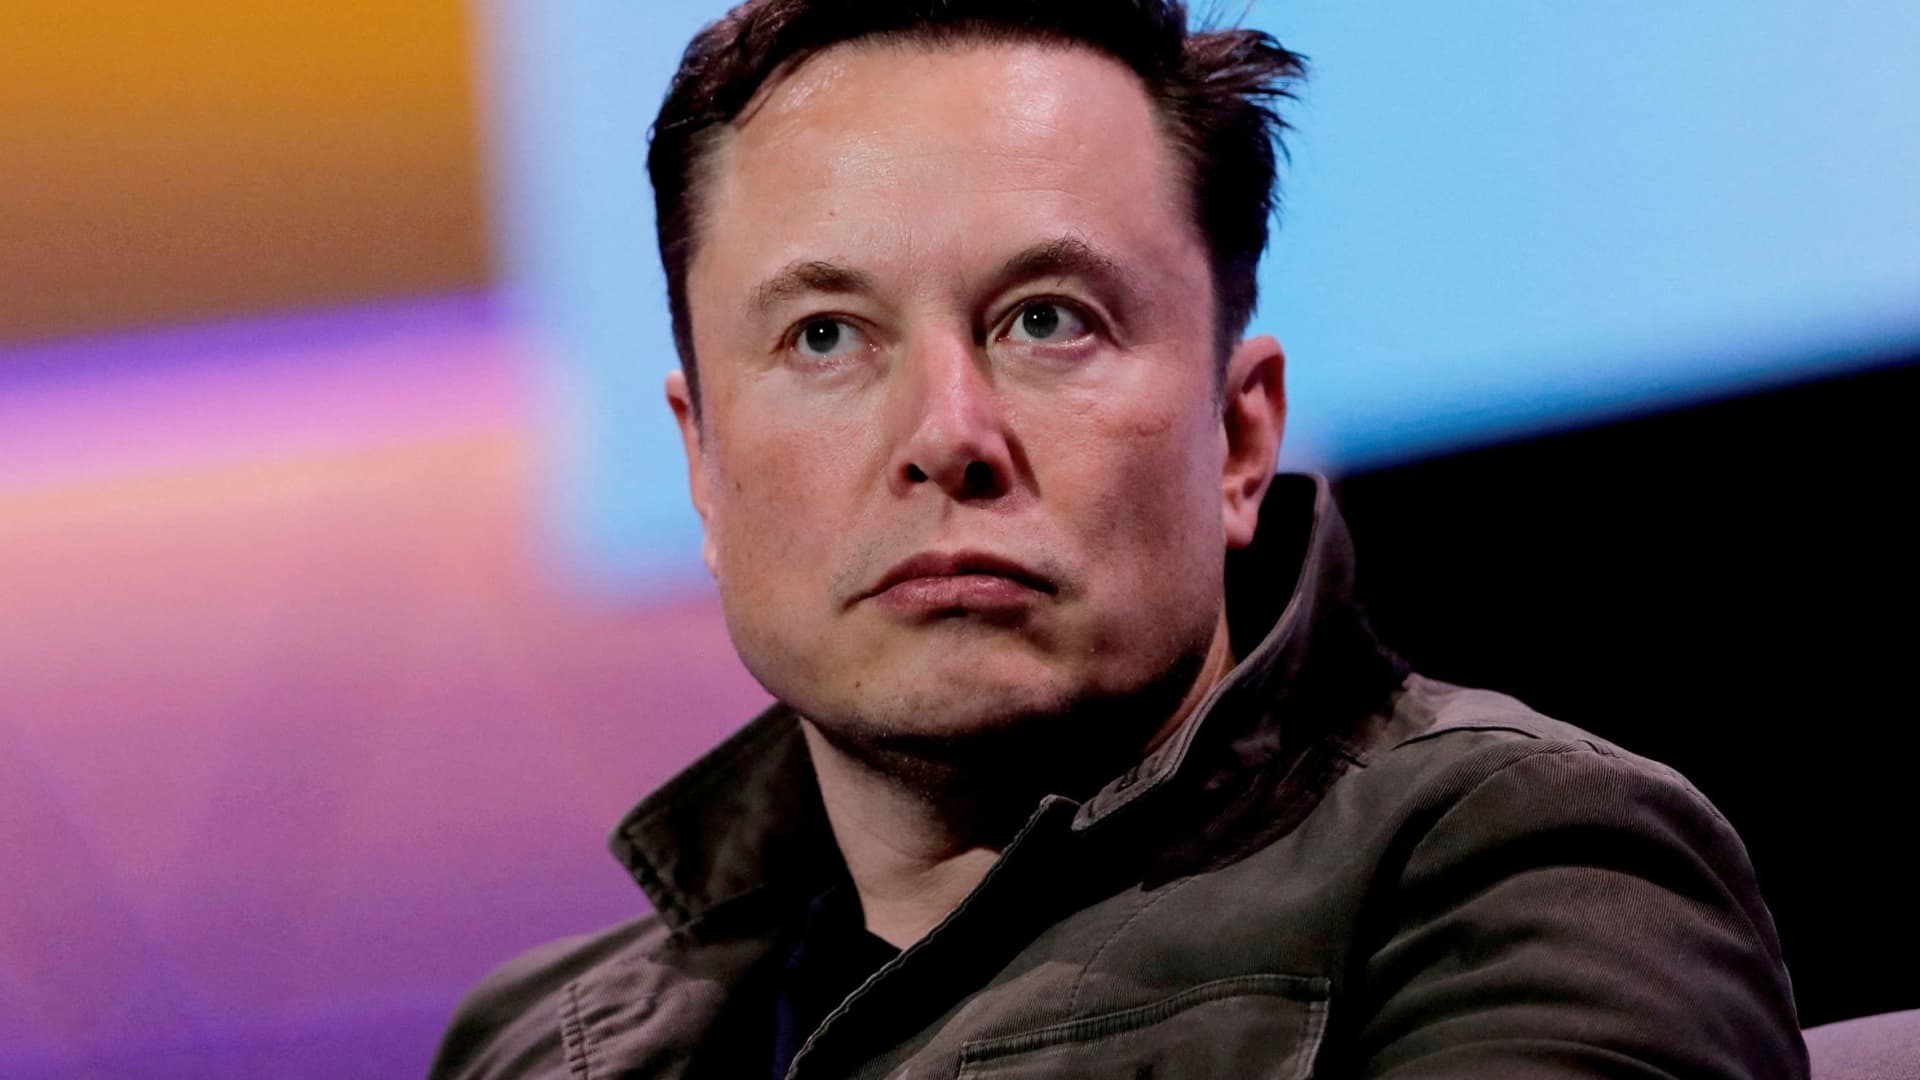 Elon Musk is no longer the richest person in the world Auto Recent